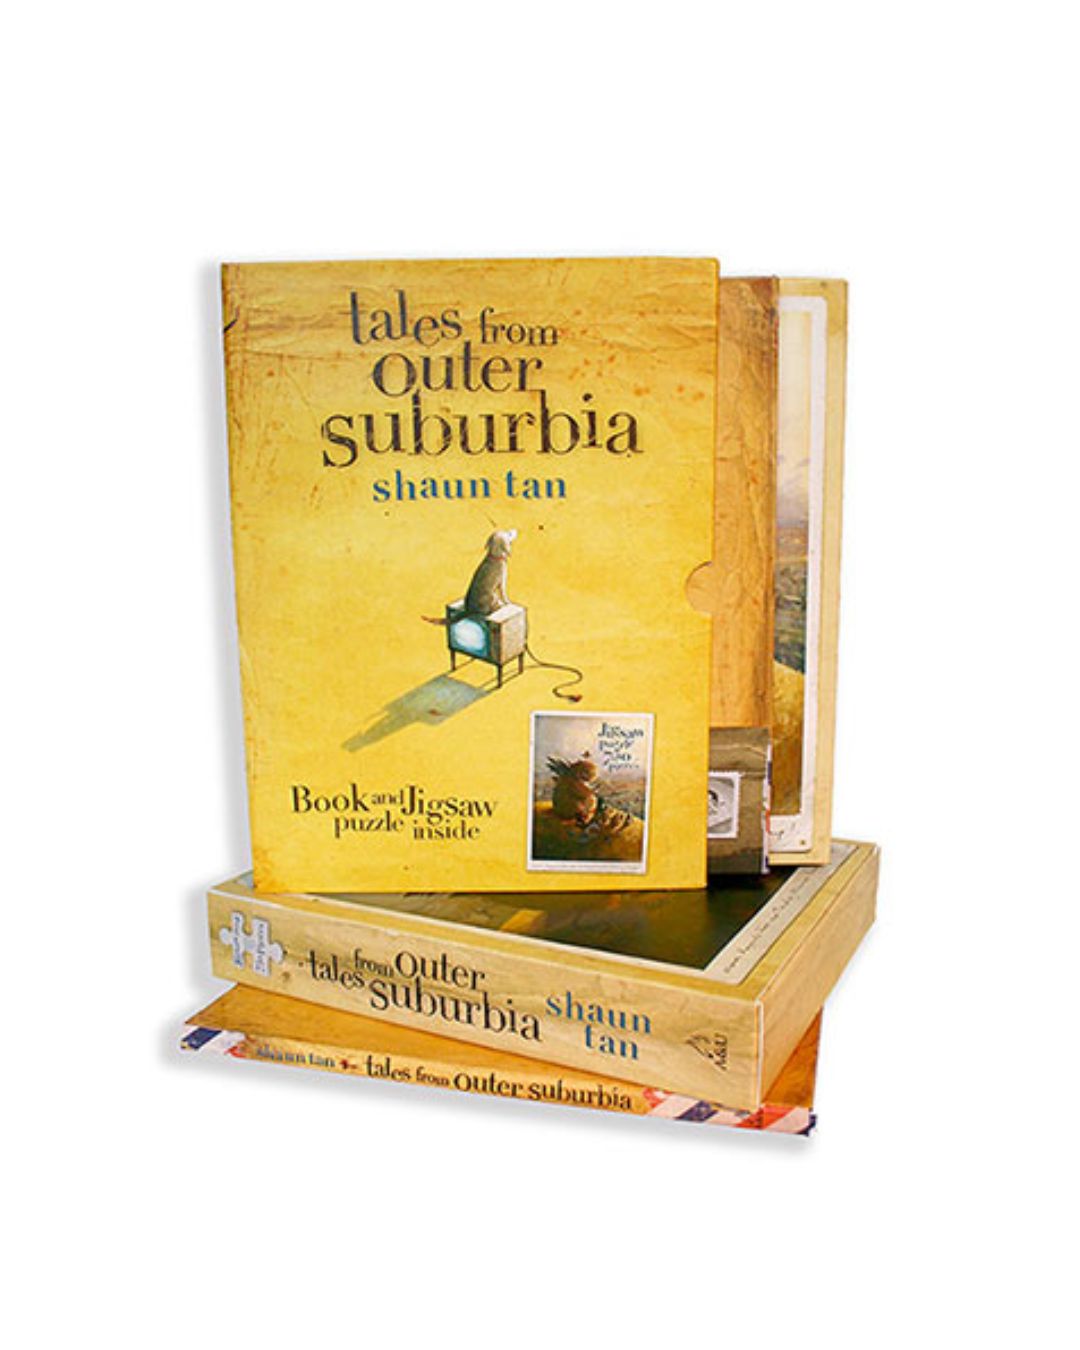 buy tales from outer suburbia book and jigsaw puzzle - OnlineBooksOutlet